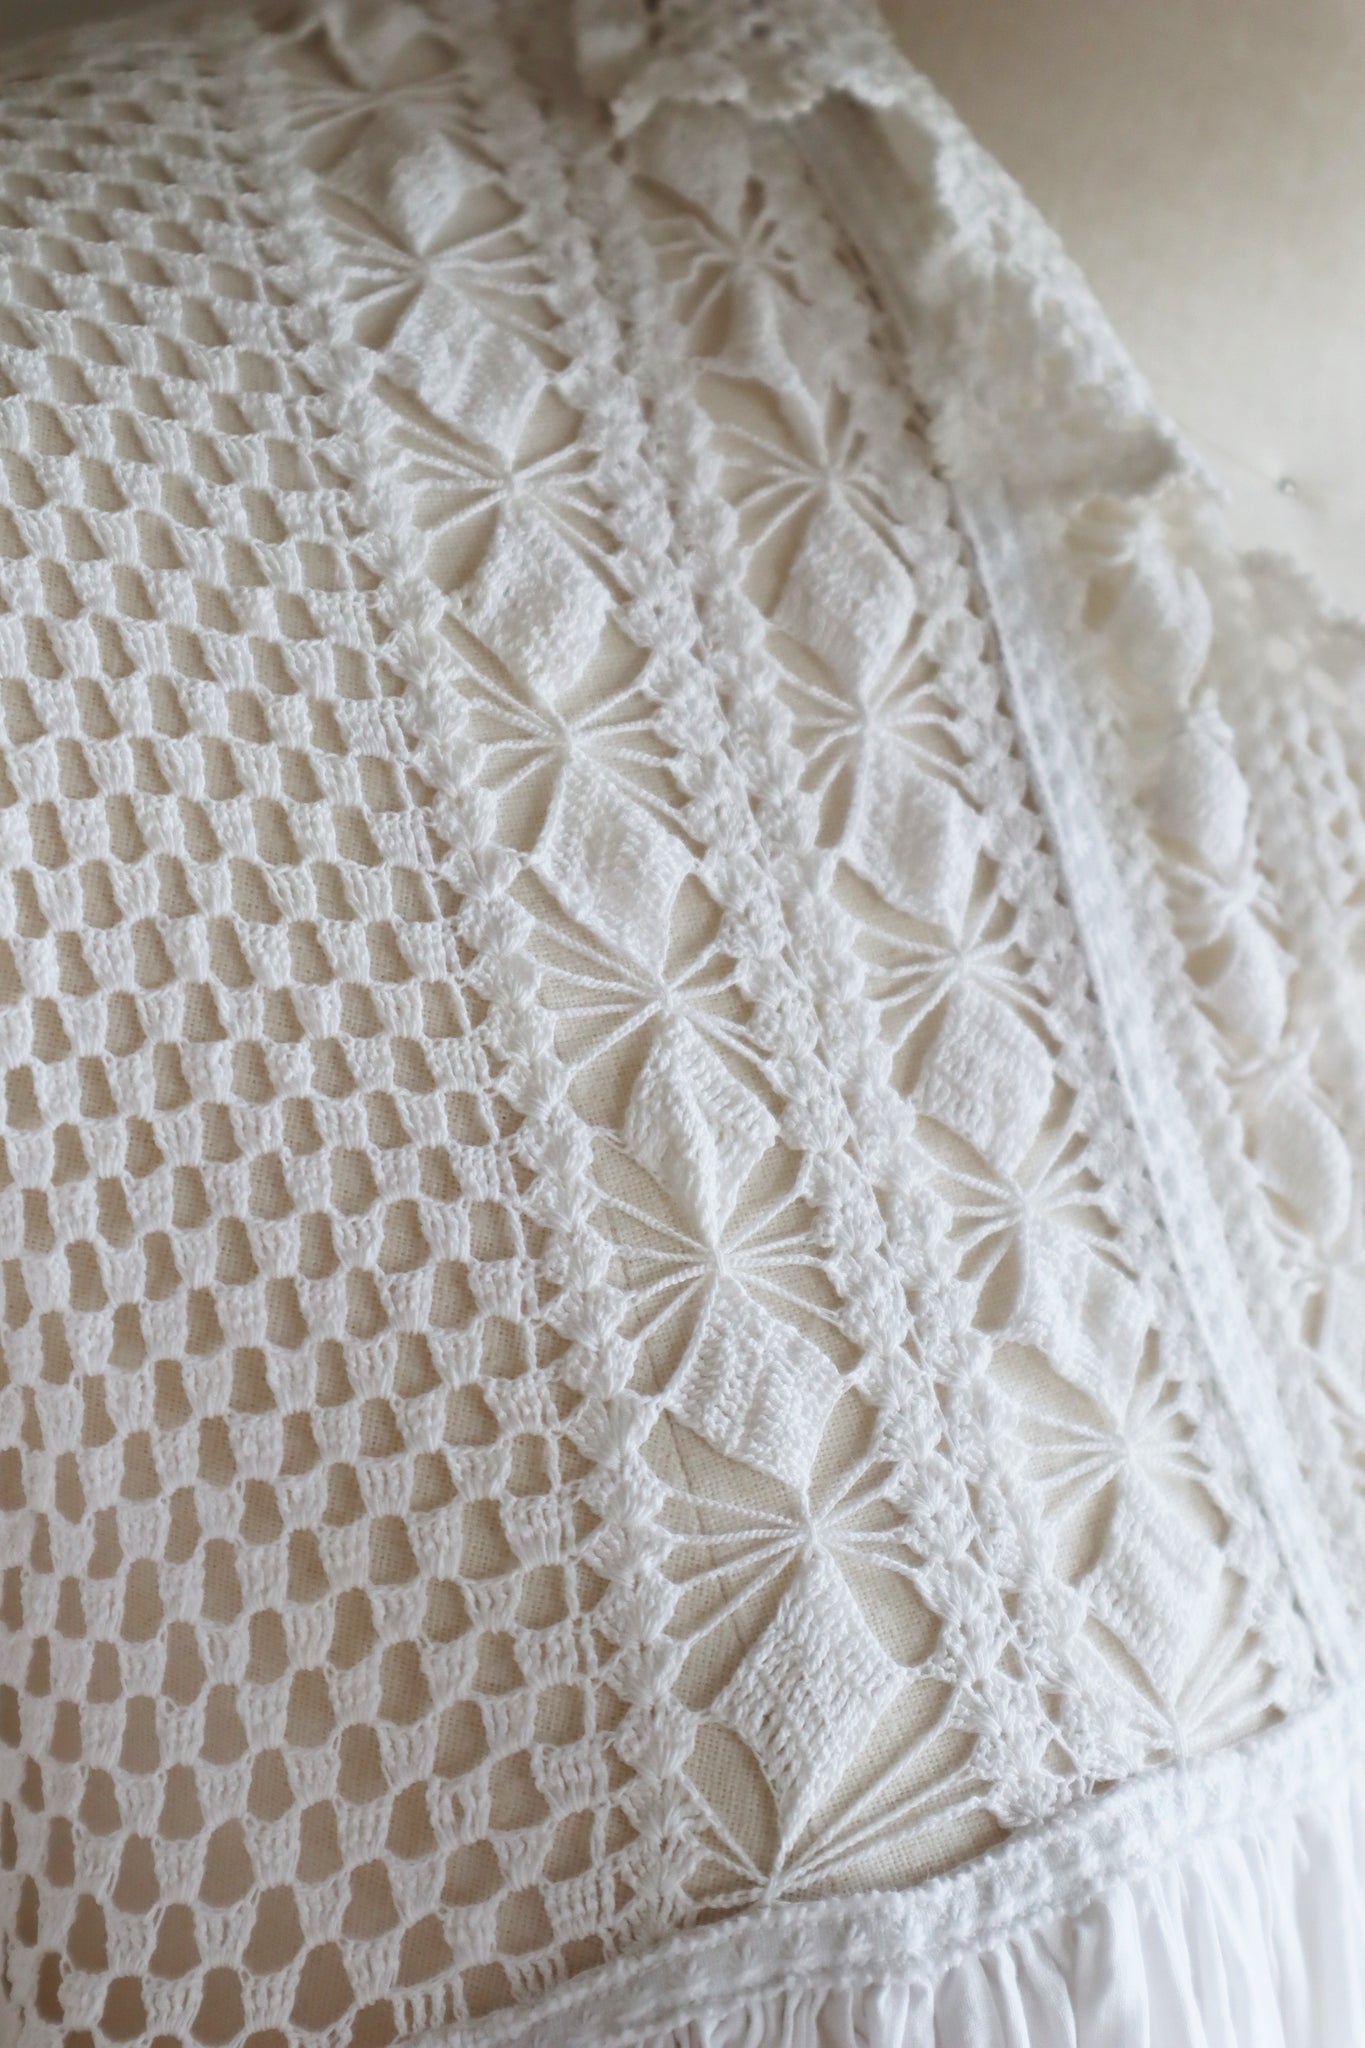 1900s Crocheted Lace Cotton Dress